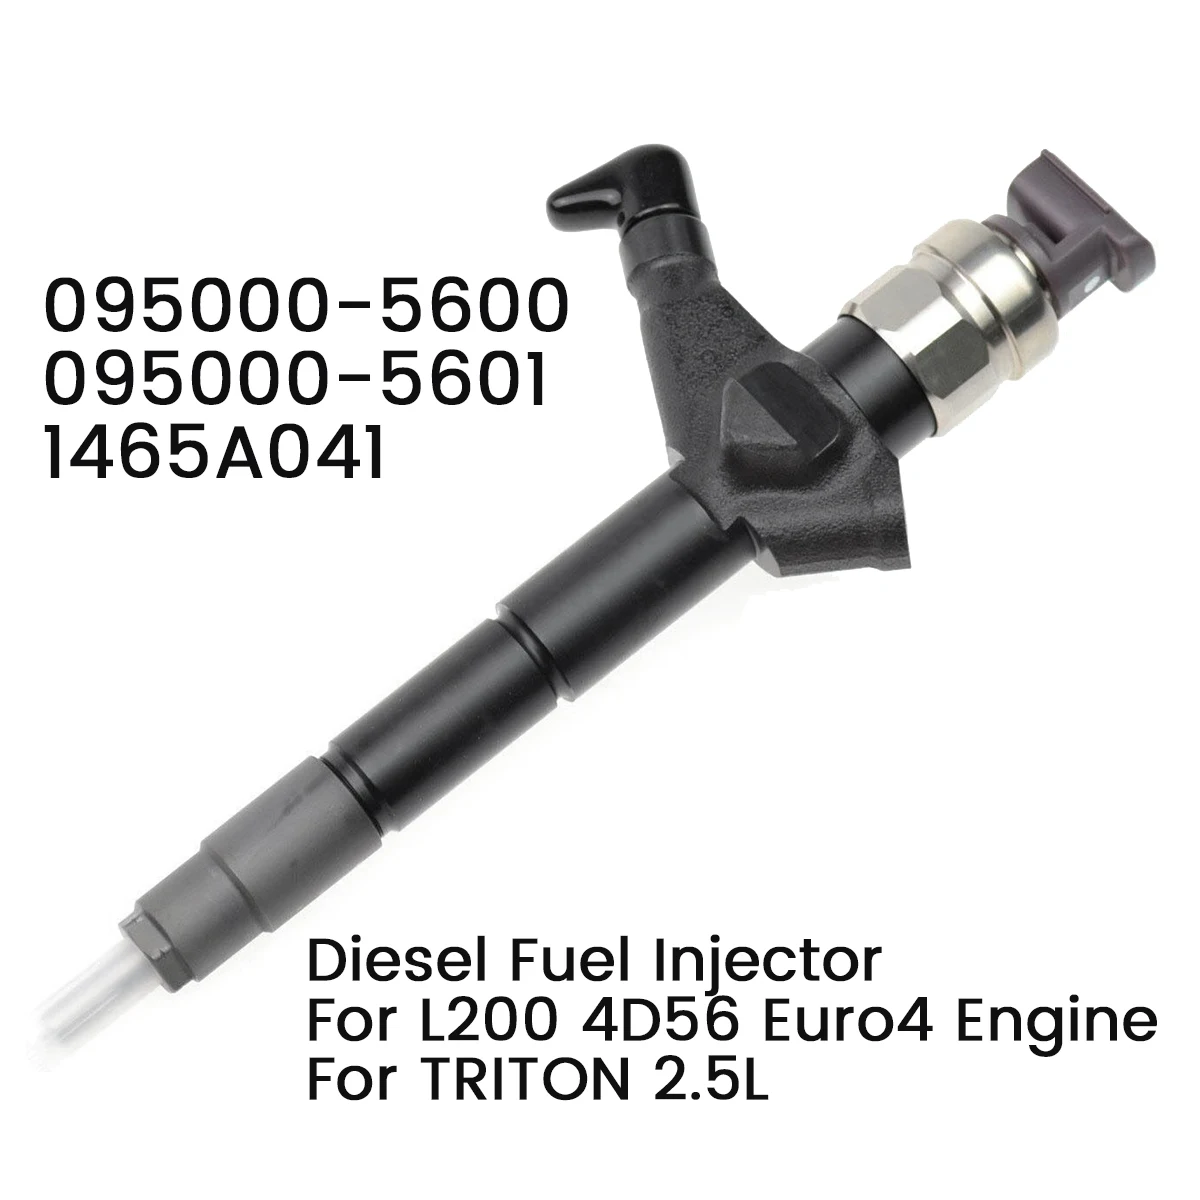 

095000-5600 New Diesel Common Rail Injector 1465A041 for Denso Mitsubishi L200 4D56 Euro4 095000-5601